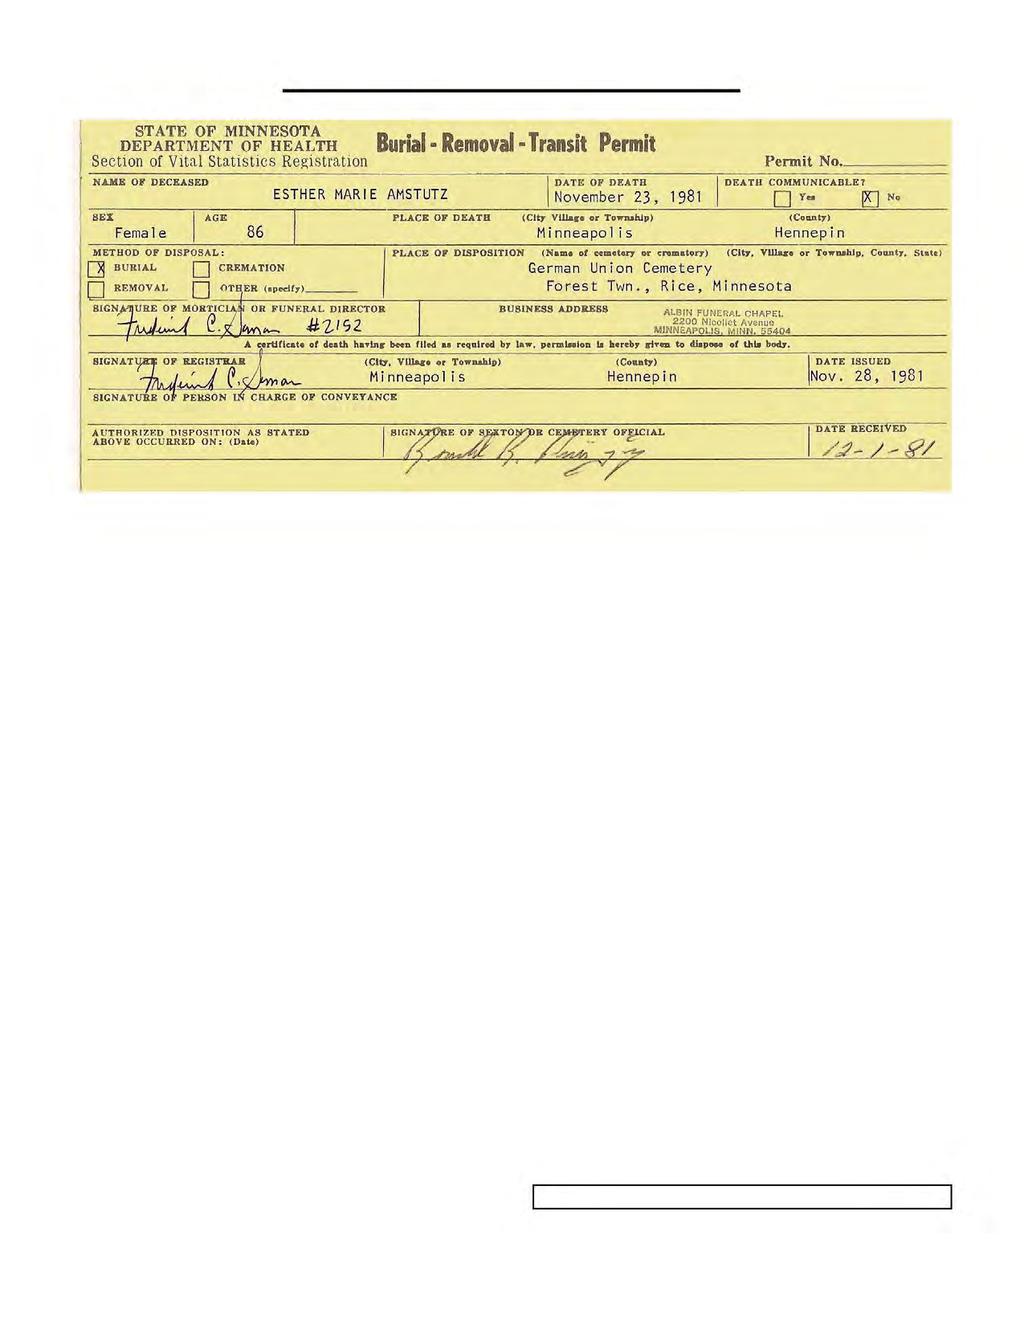 STATE OF DEPARTMENT OF HEALTH SectIOn of Vital Statistics Registration NAME OF DECEASED SEX Female I AGE 86 GERMAN UNION CEMETERY Burial- Removal- Transit Permit ESTHER MARIE AMSTUTZ PLACE OF DEATH